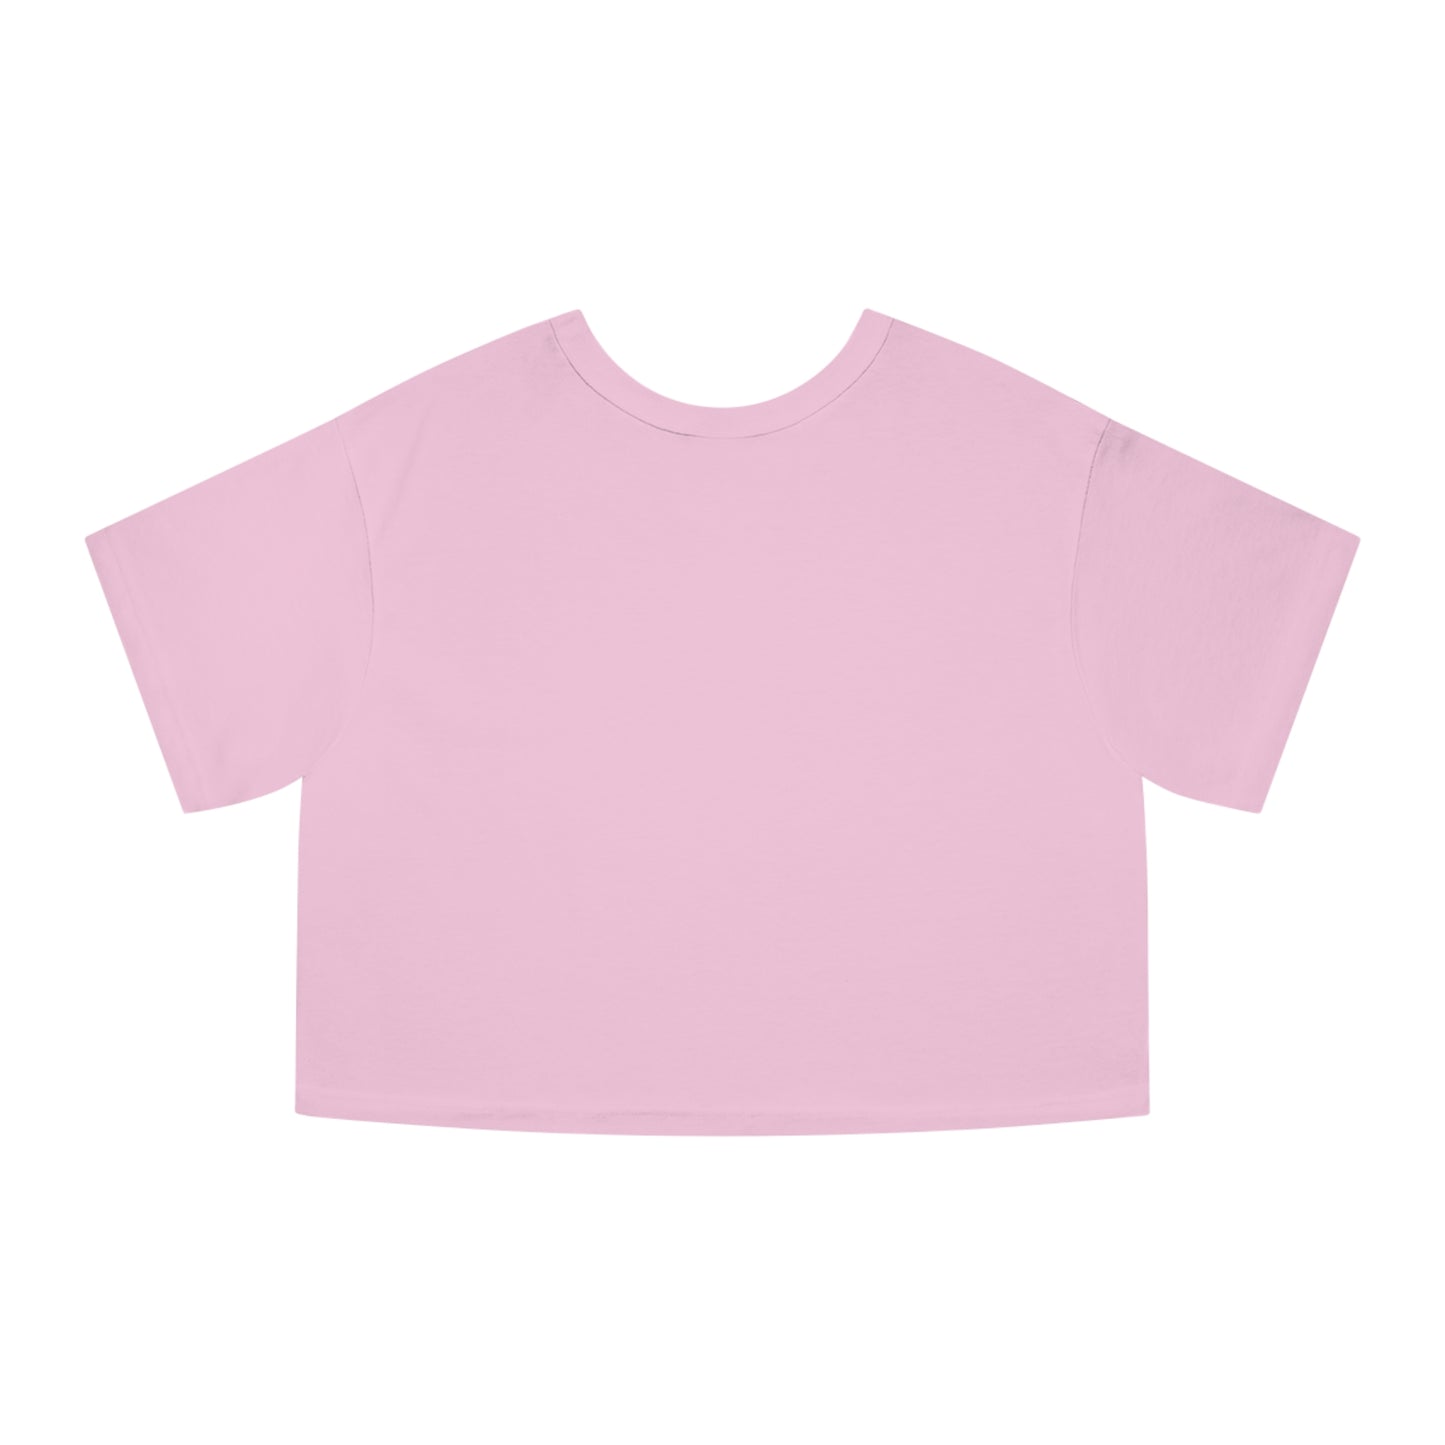 "I'm not like other girls" - Champion crop top